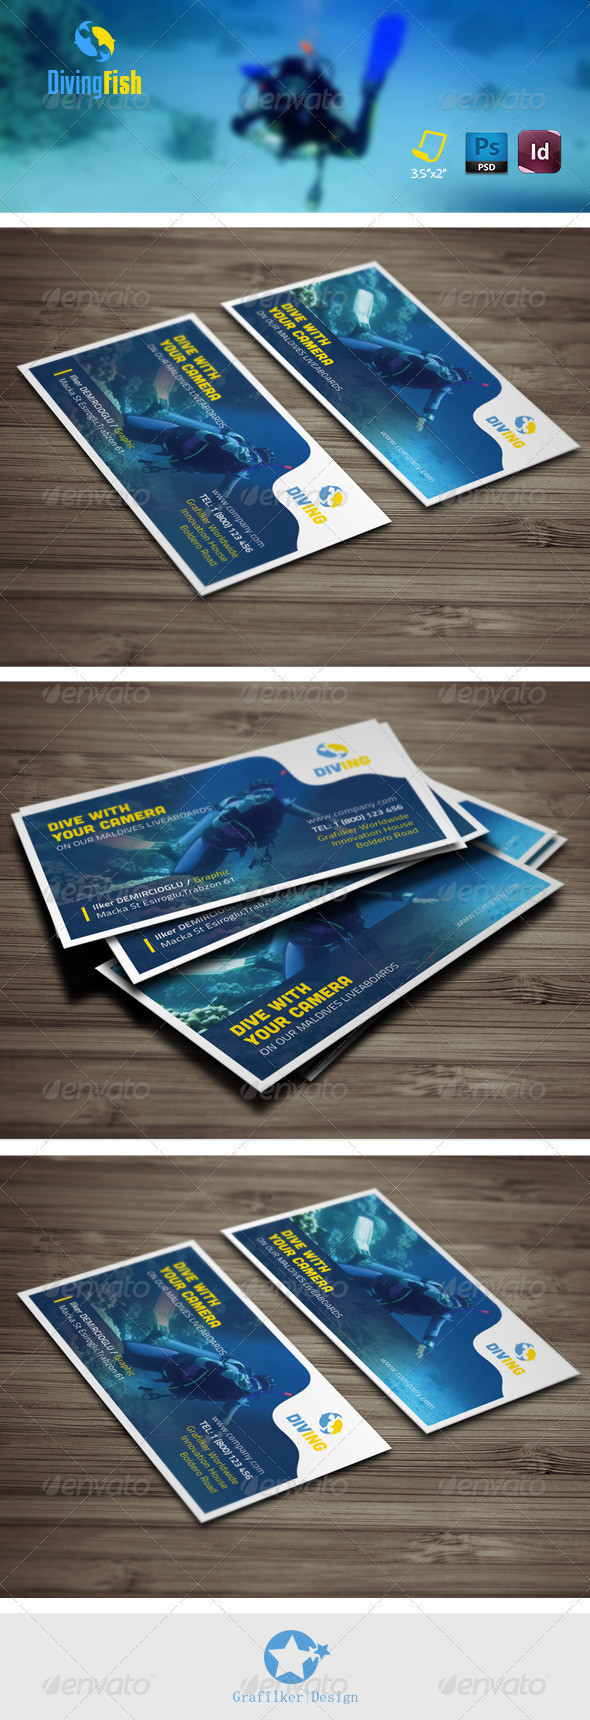 01 business card p